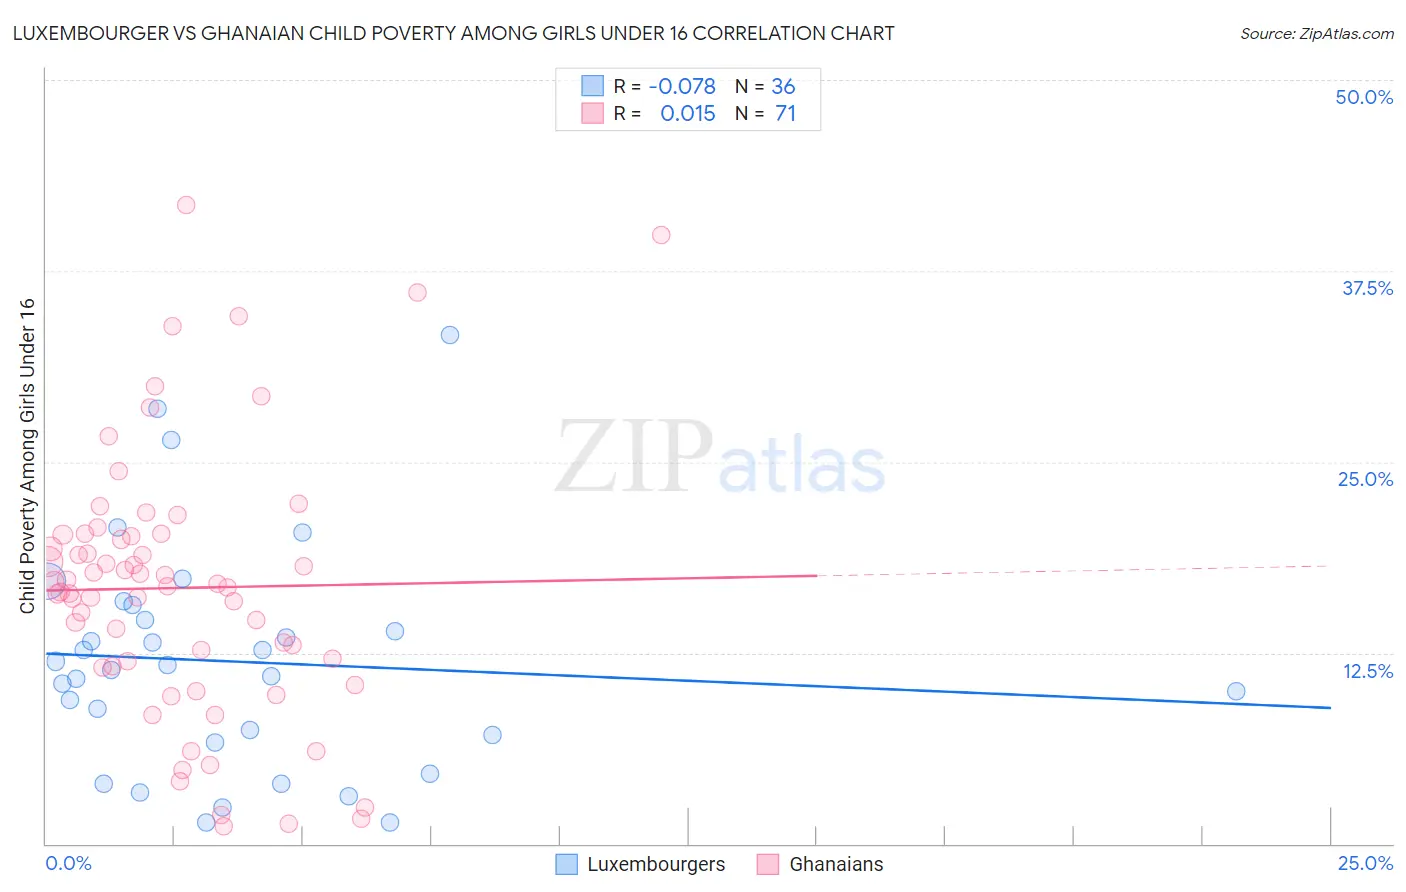 Luxembourger vs Ghanaian Child Poverty Among Girls Under 16